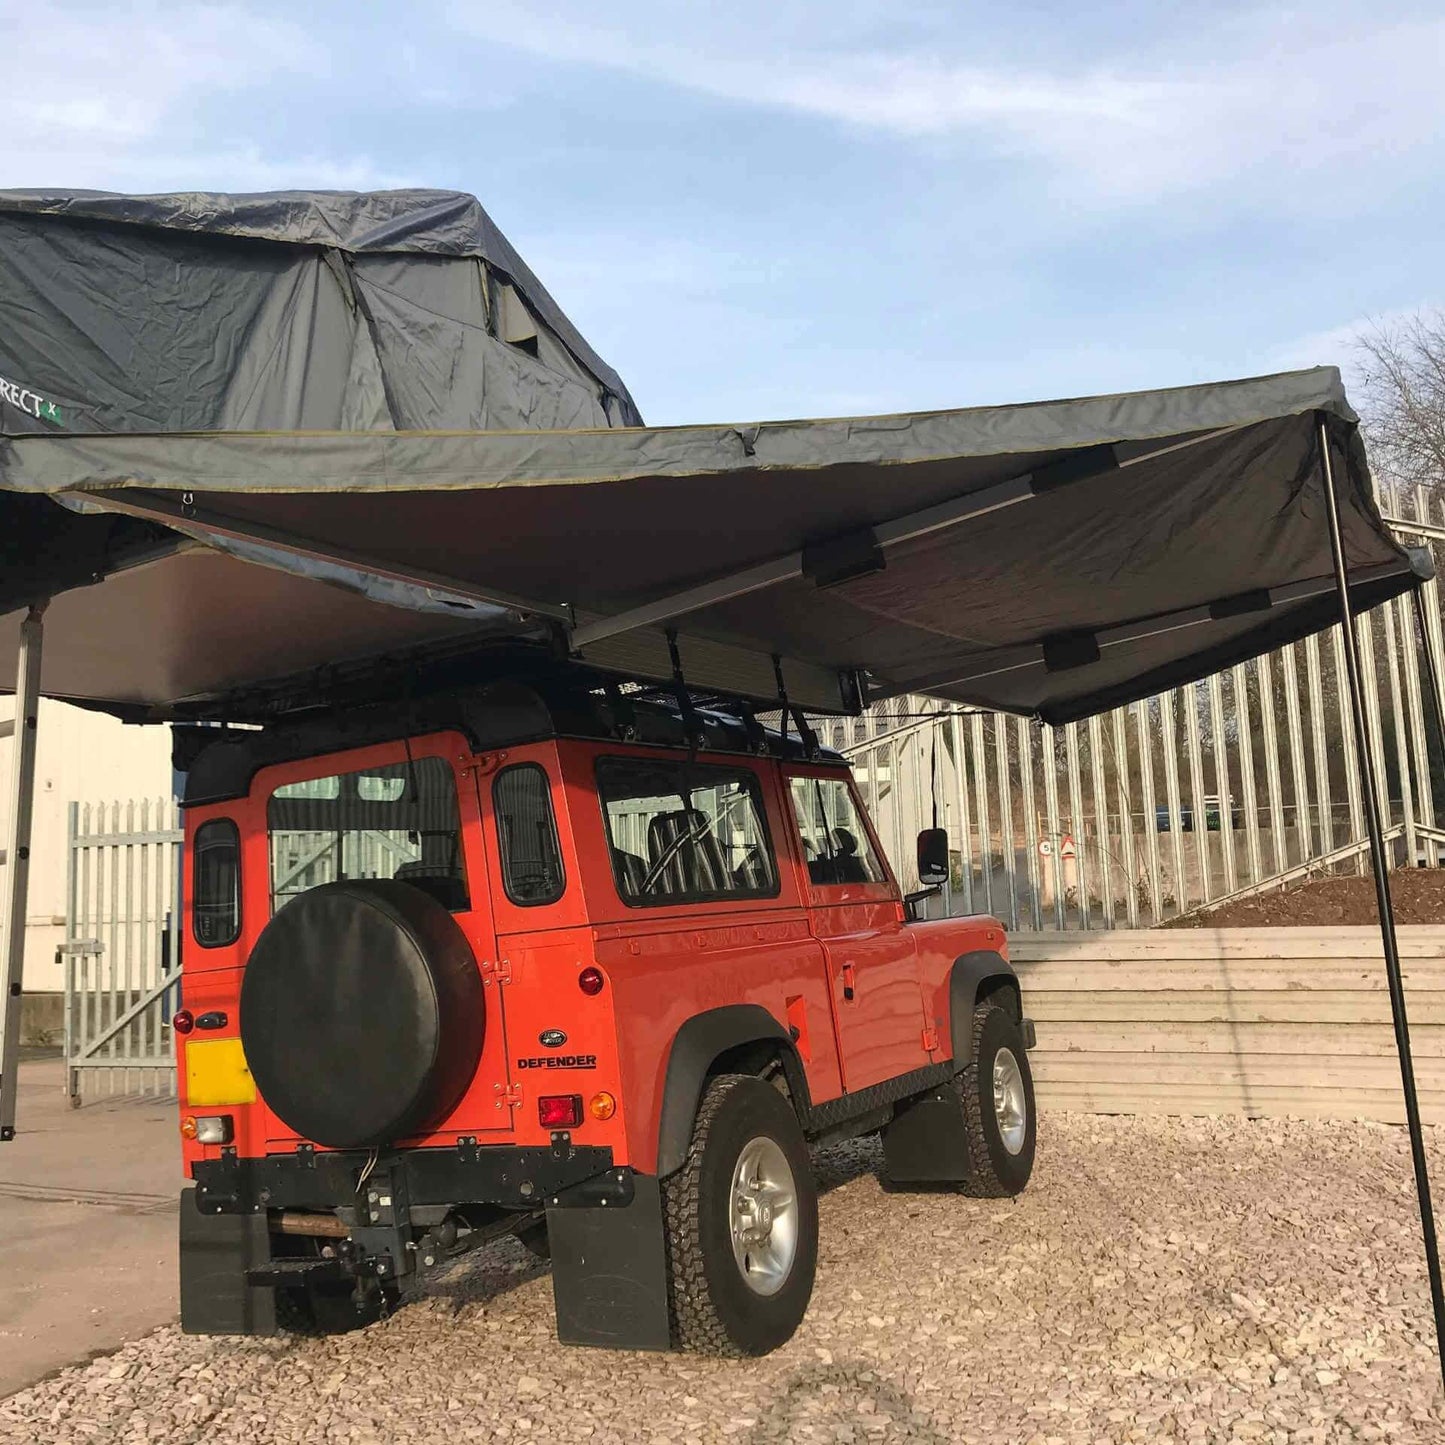 180 Degree Granite Grey Overland Expedition Foldout Vehicle Camping Side Awning -  - sold by Direct4x4